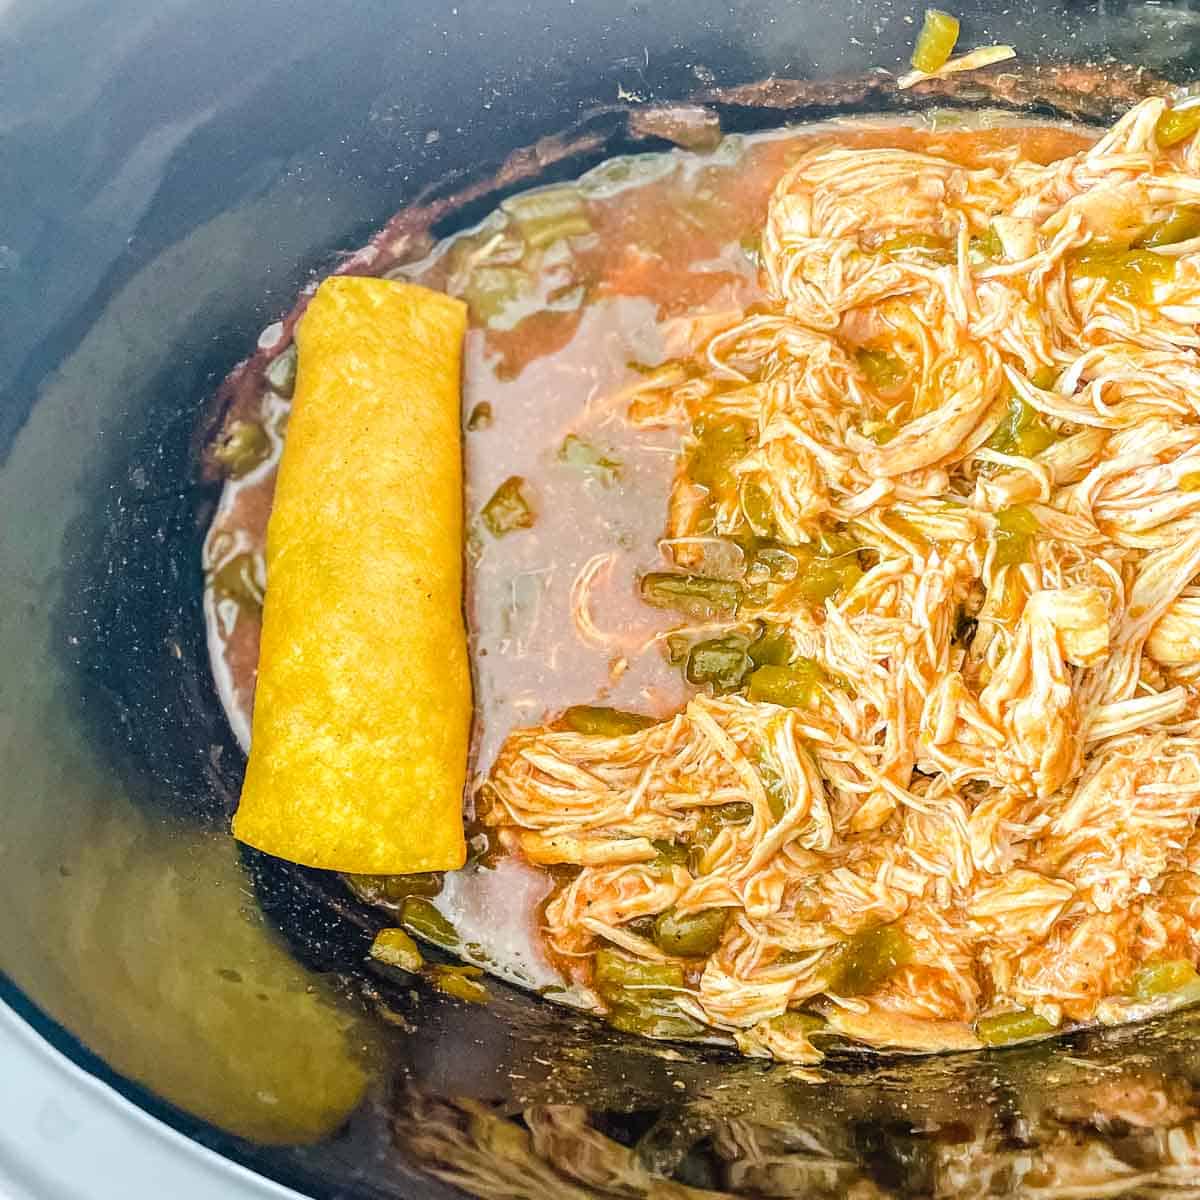 One chicken enchilada is added back to the crockpot.